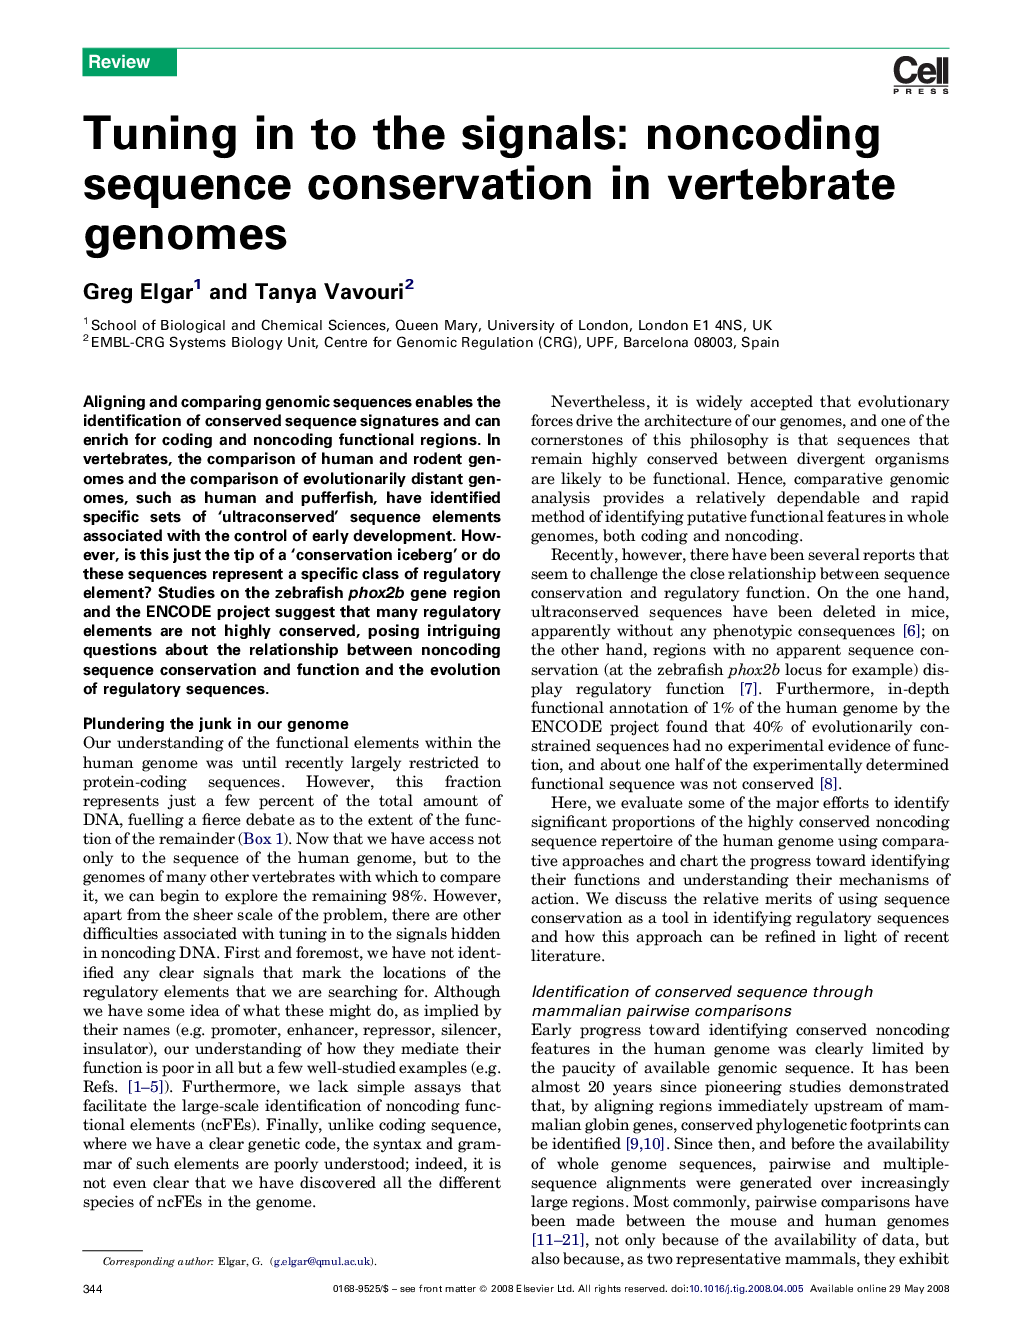 Tuning in to the signals: noncoding sequence conservation in vertebrate genomes